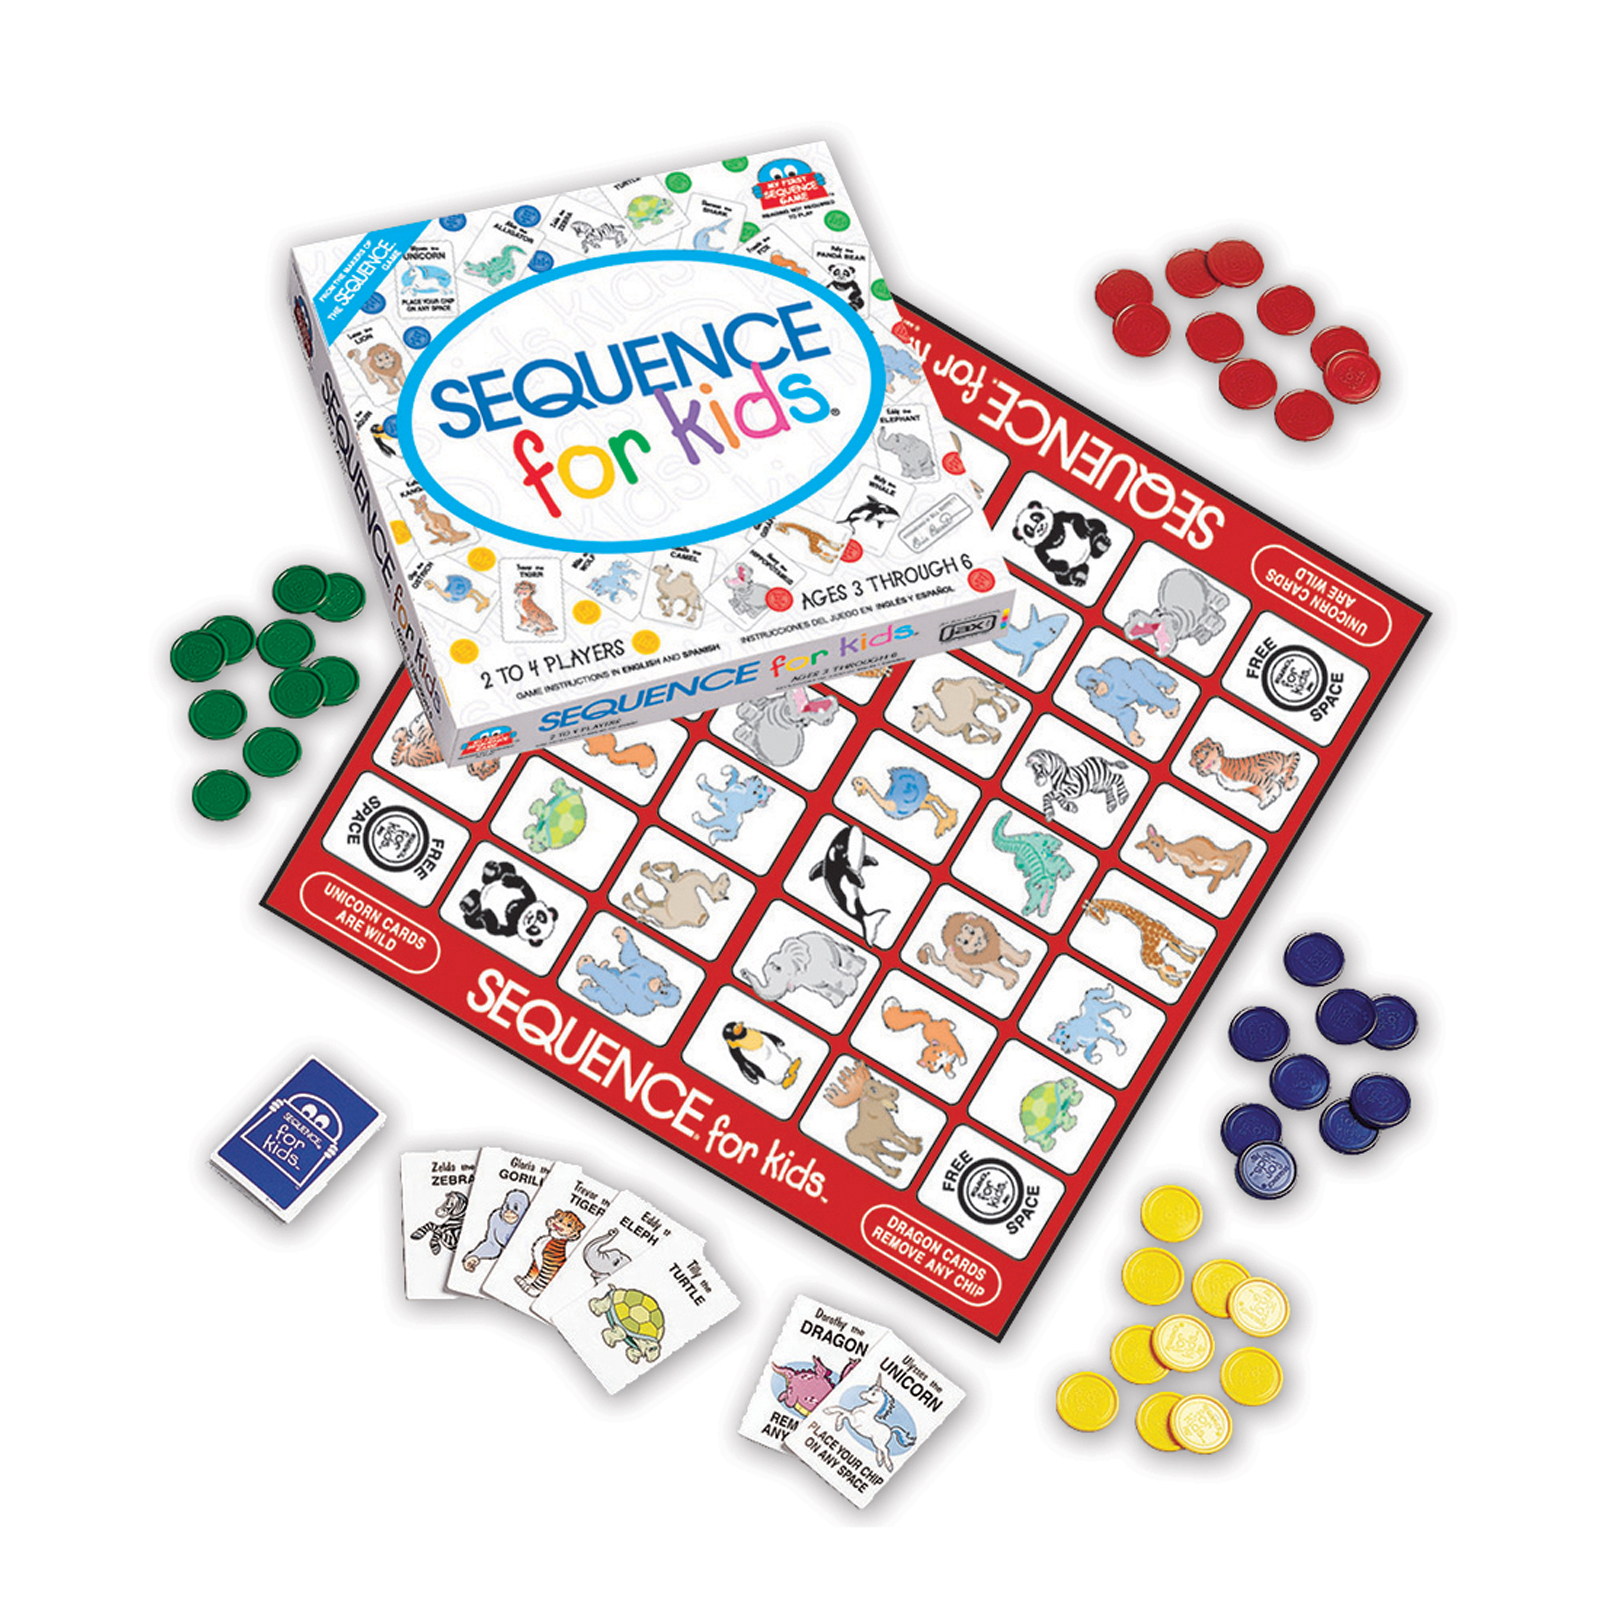 JAX Ltd. Sequence for Kids Game